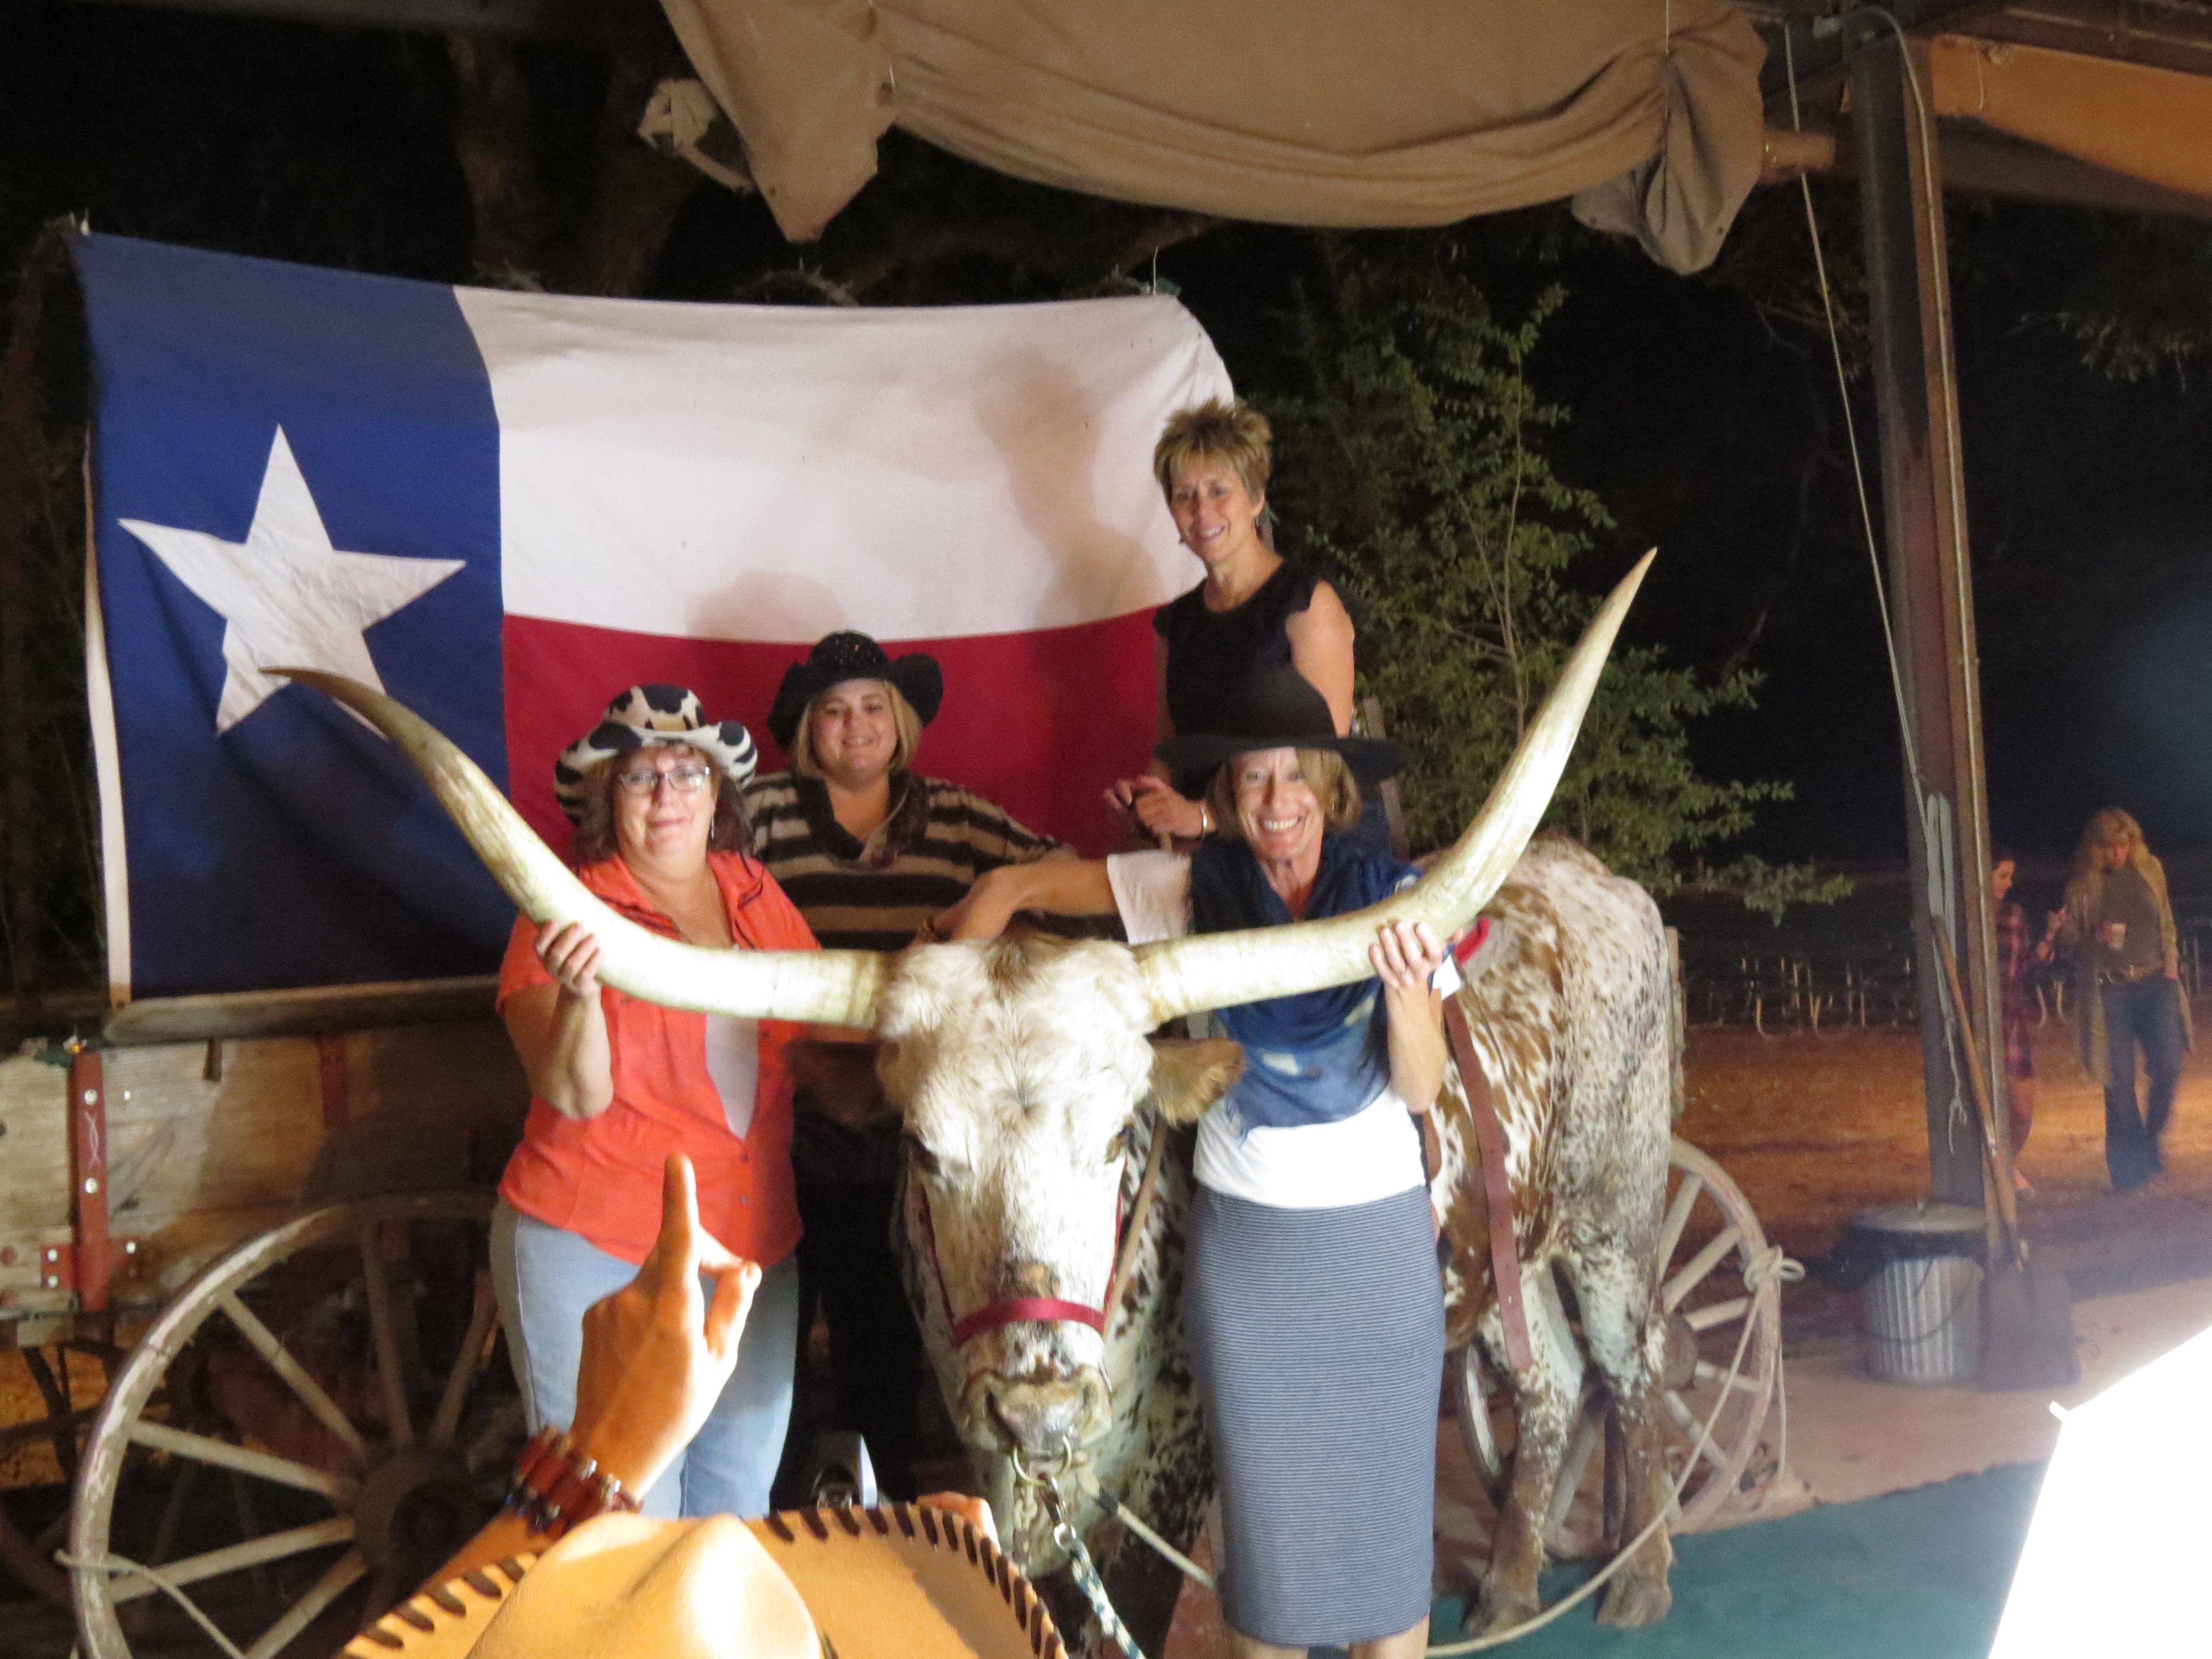 A great time was had by all, as attendees pause for a photo with a Texas Longhorn